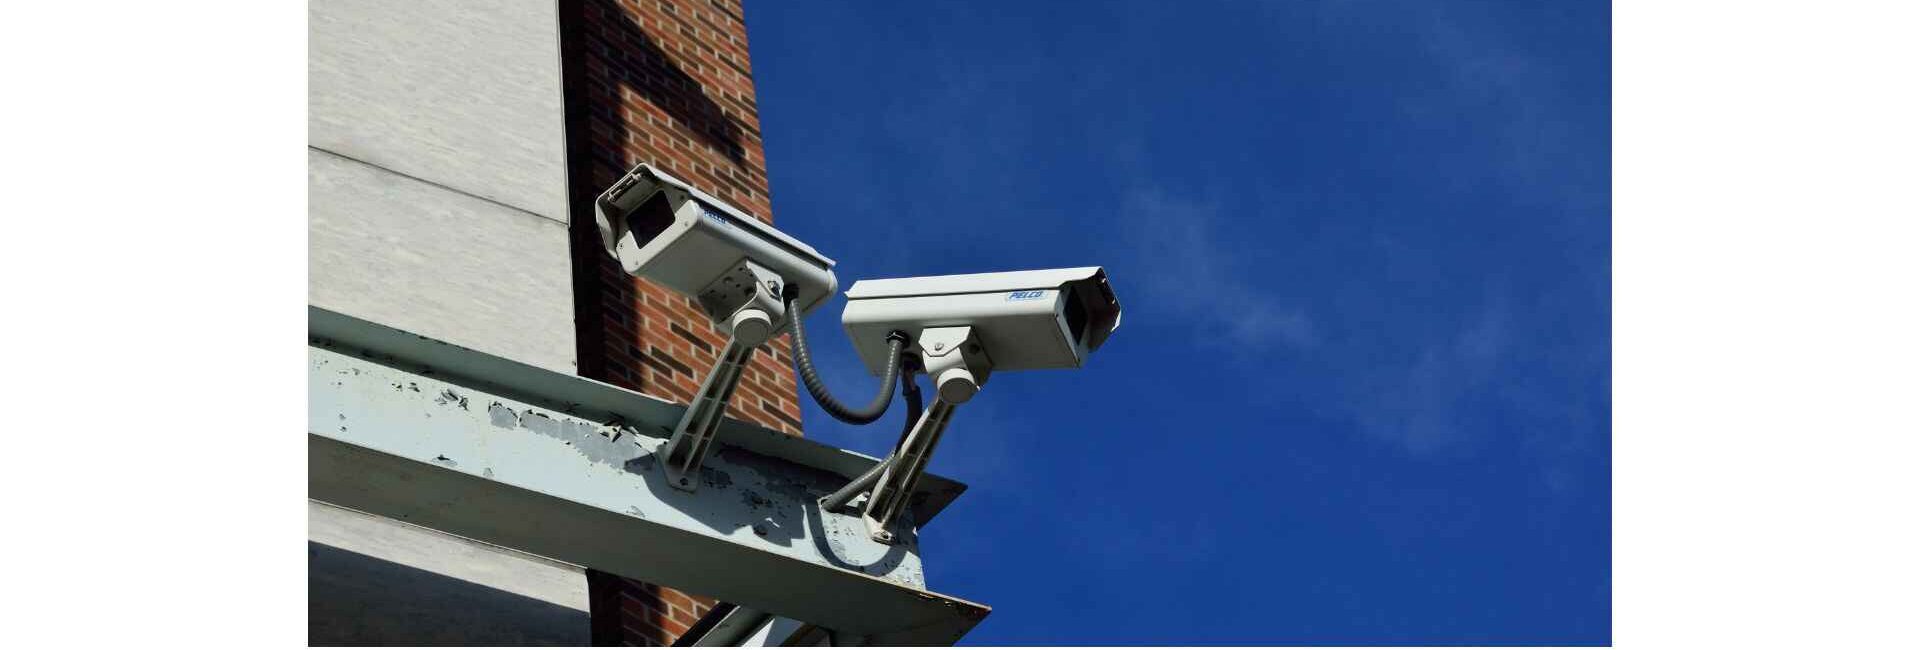 Suneye Security System - Security System Dealer and Supplier in Noida